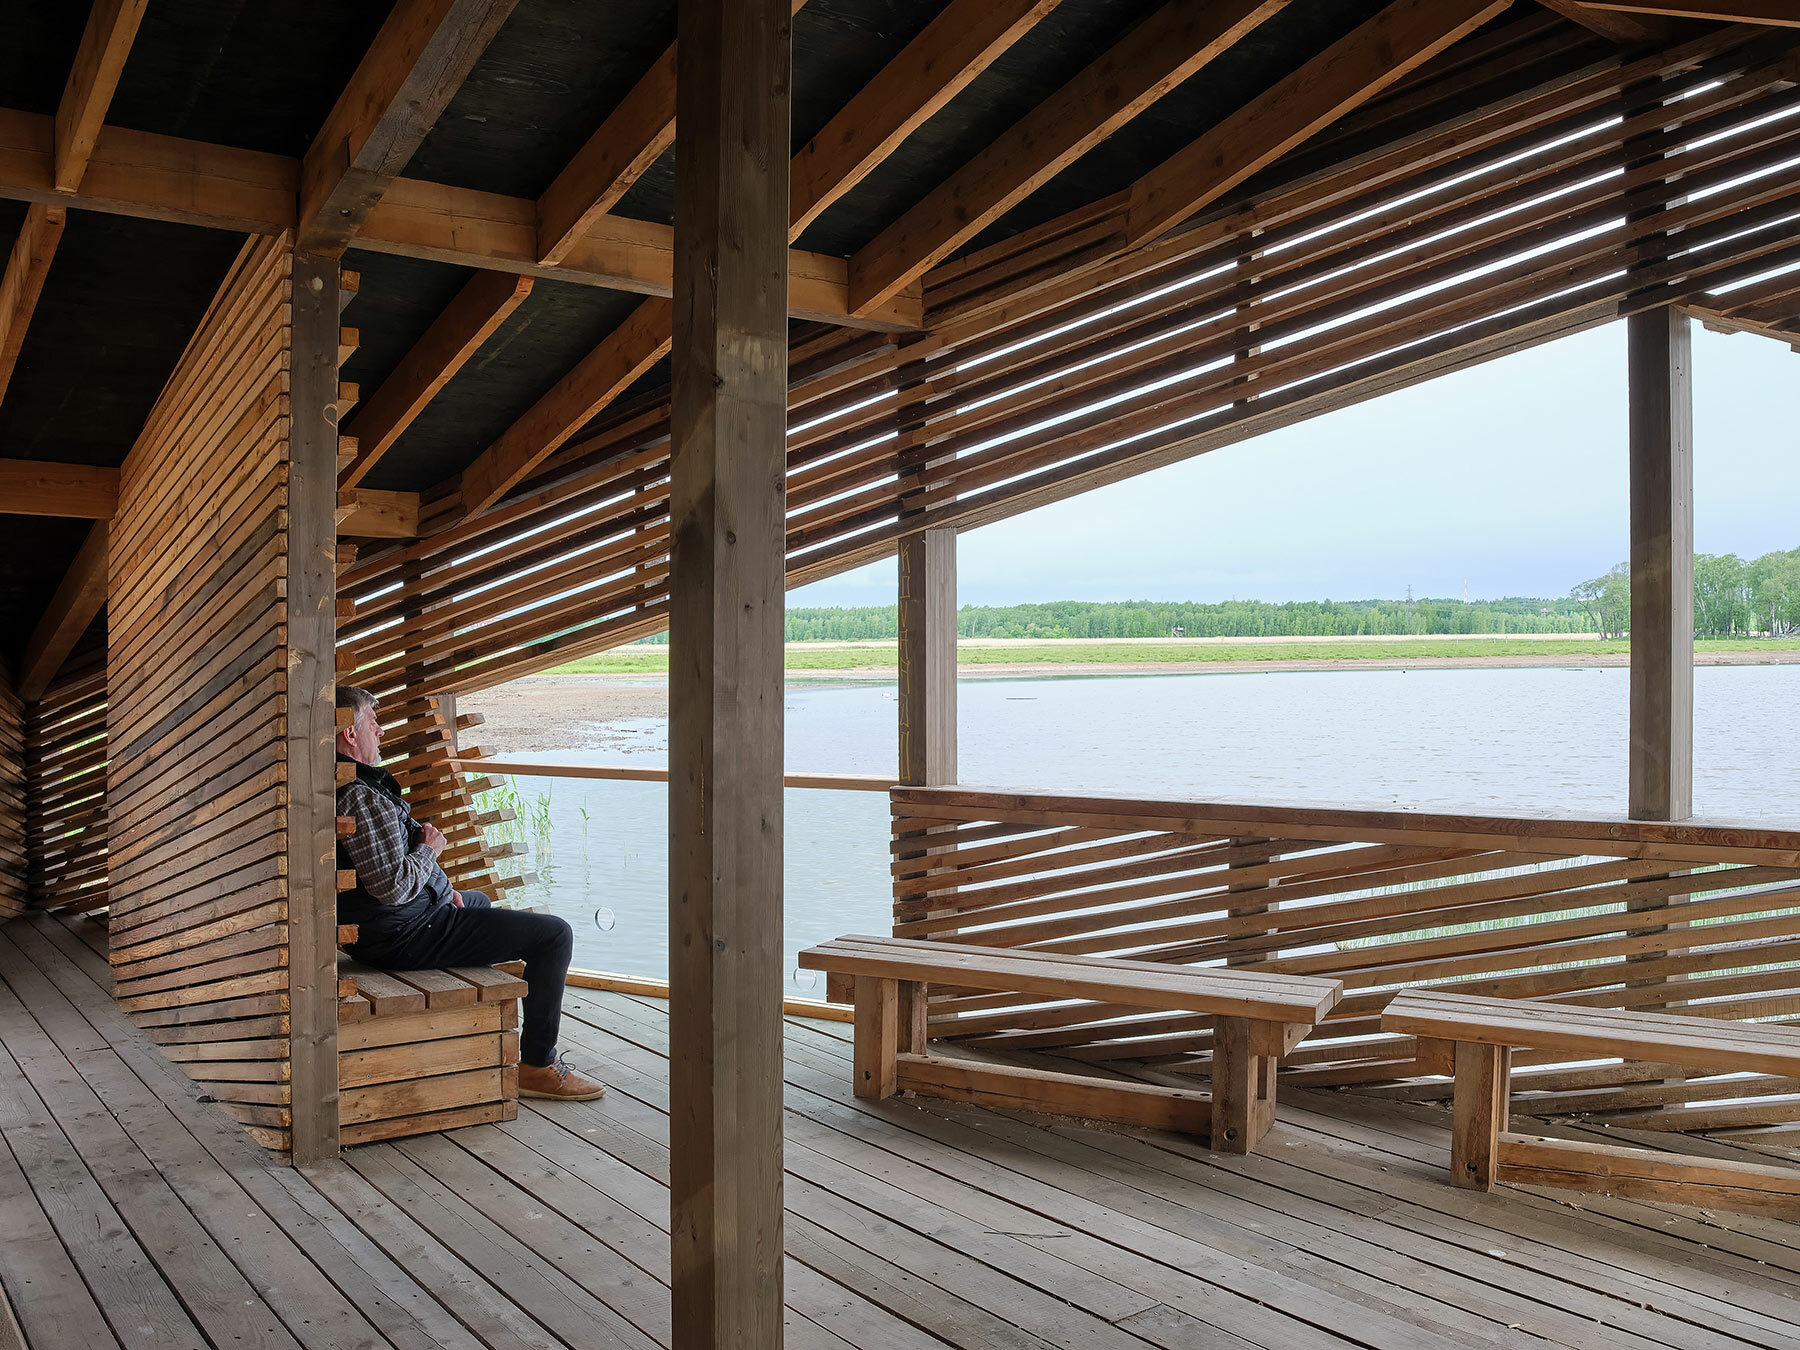 studio puisto designs floating timber finland for in hut birdwatchers